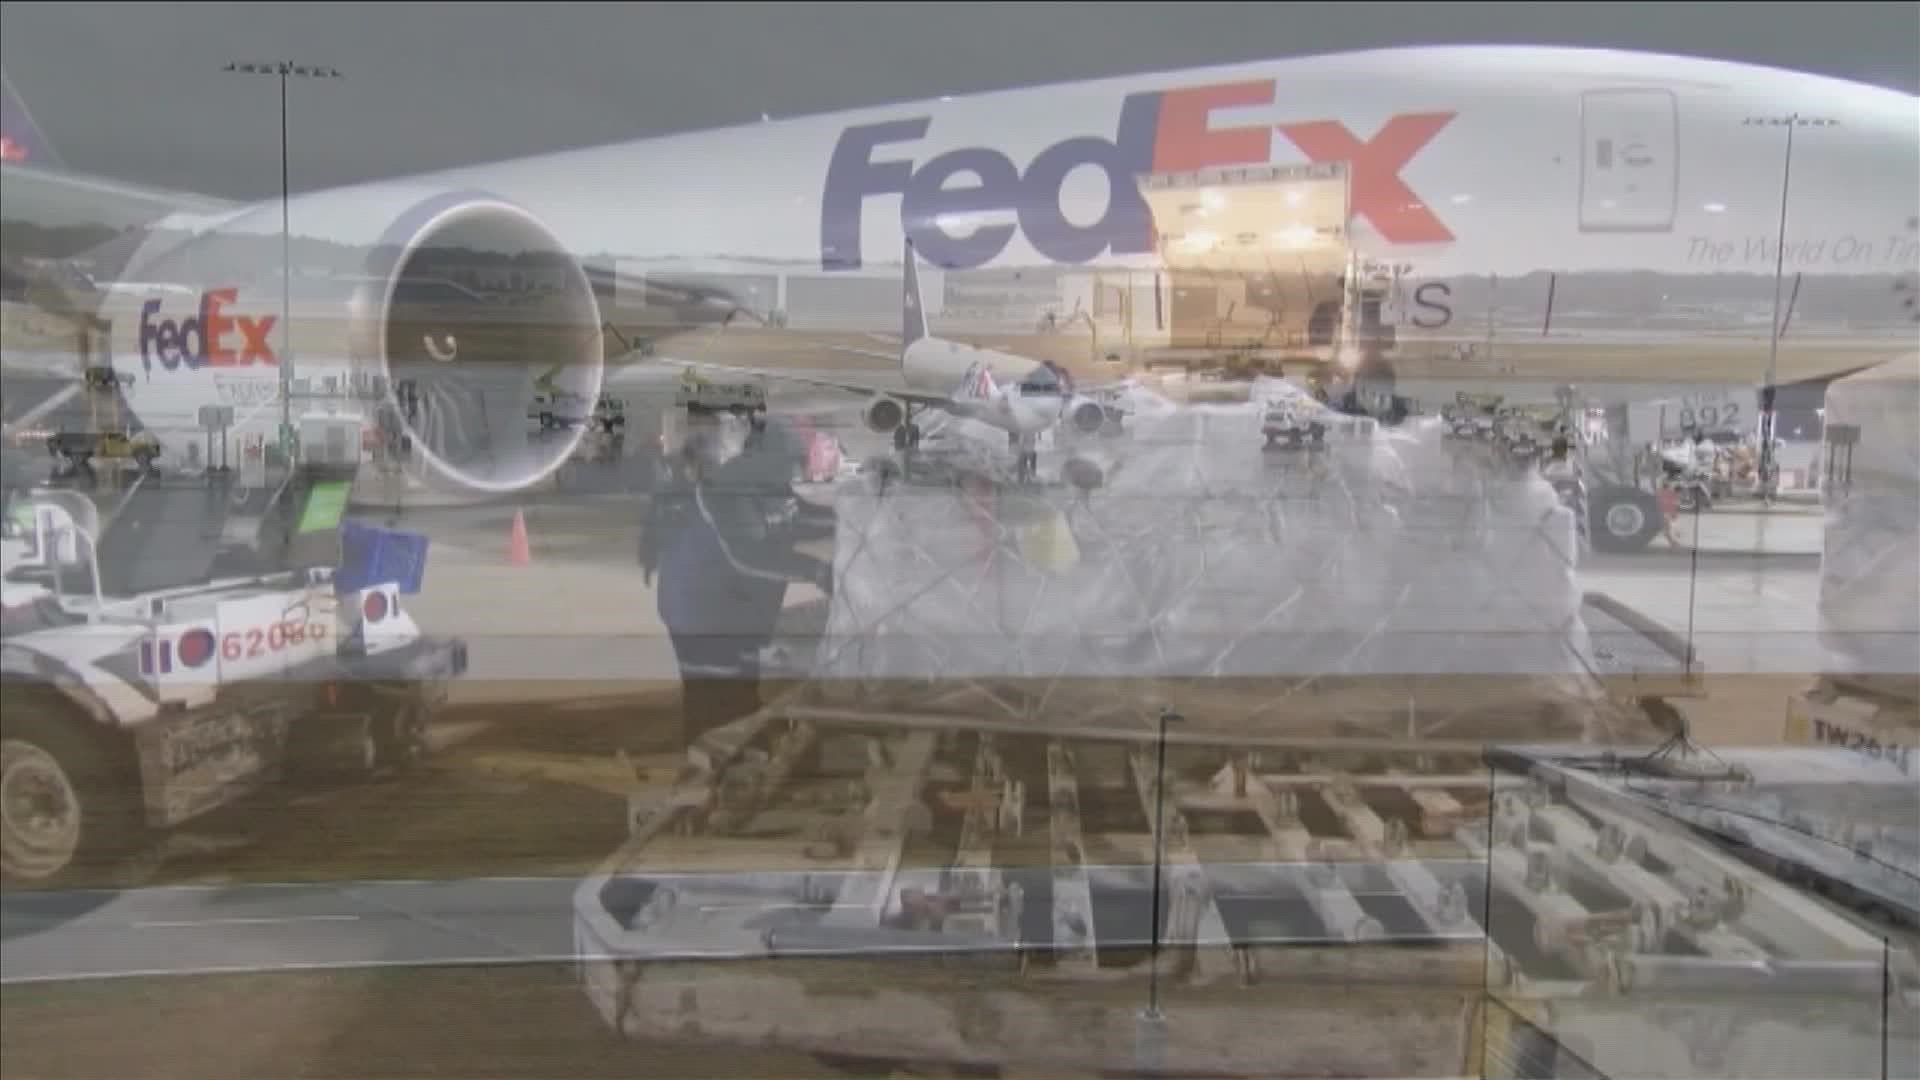 New de-icing operation for FedEx and other cargo companies are expected to get goods shipped to and from Memphis quicker, just in time for the holiday season.